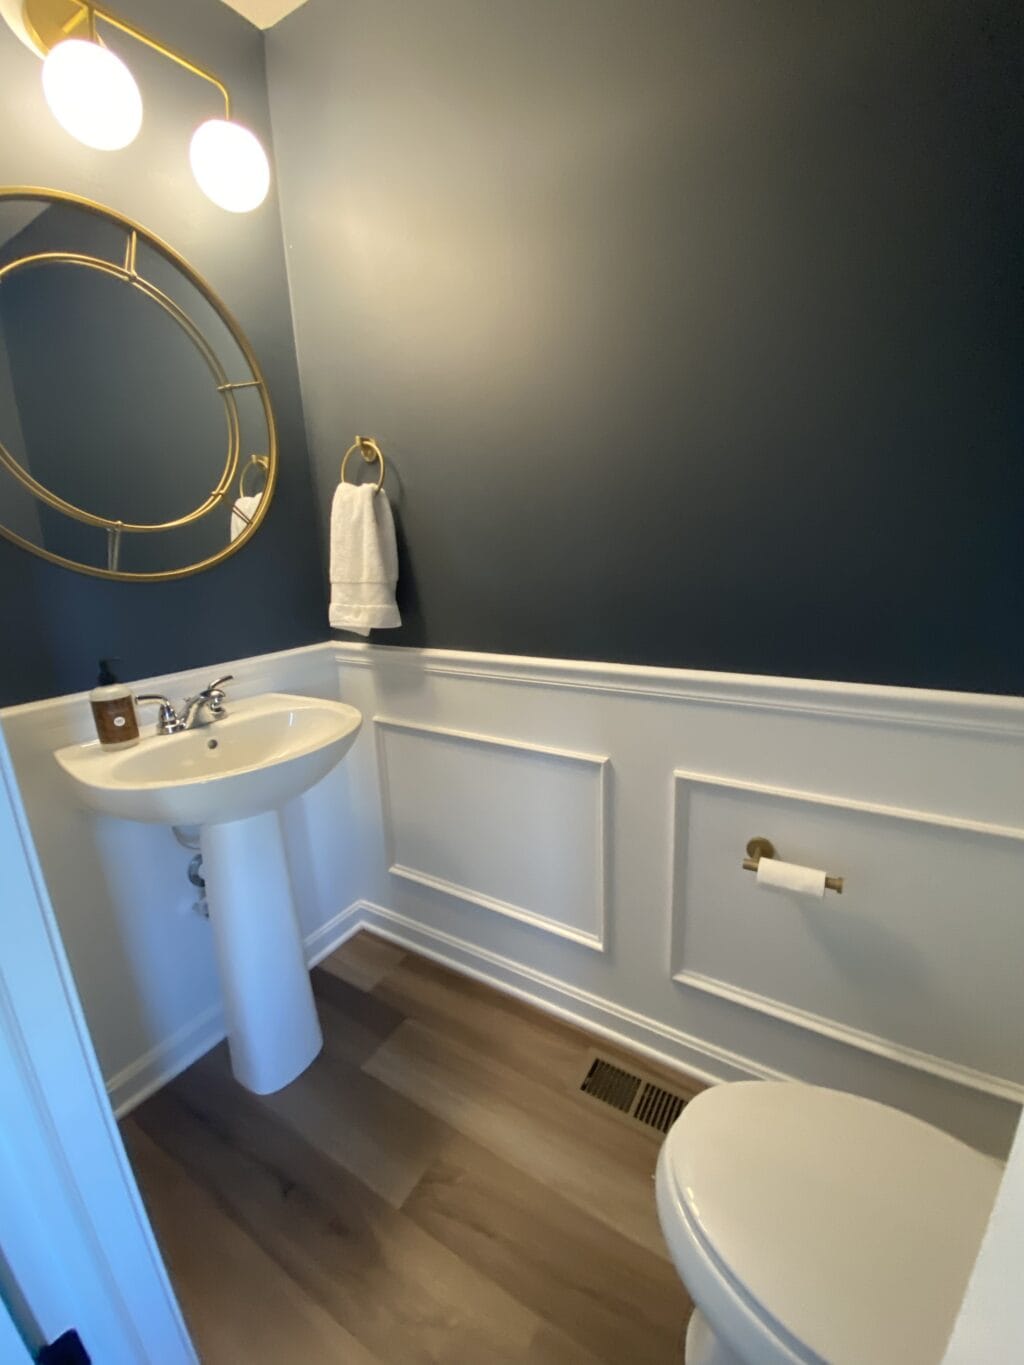 How to add hallway chair rail and picture frame molding to a bathroom